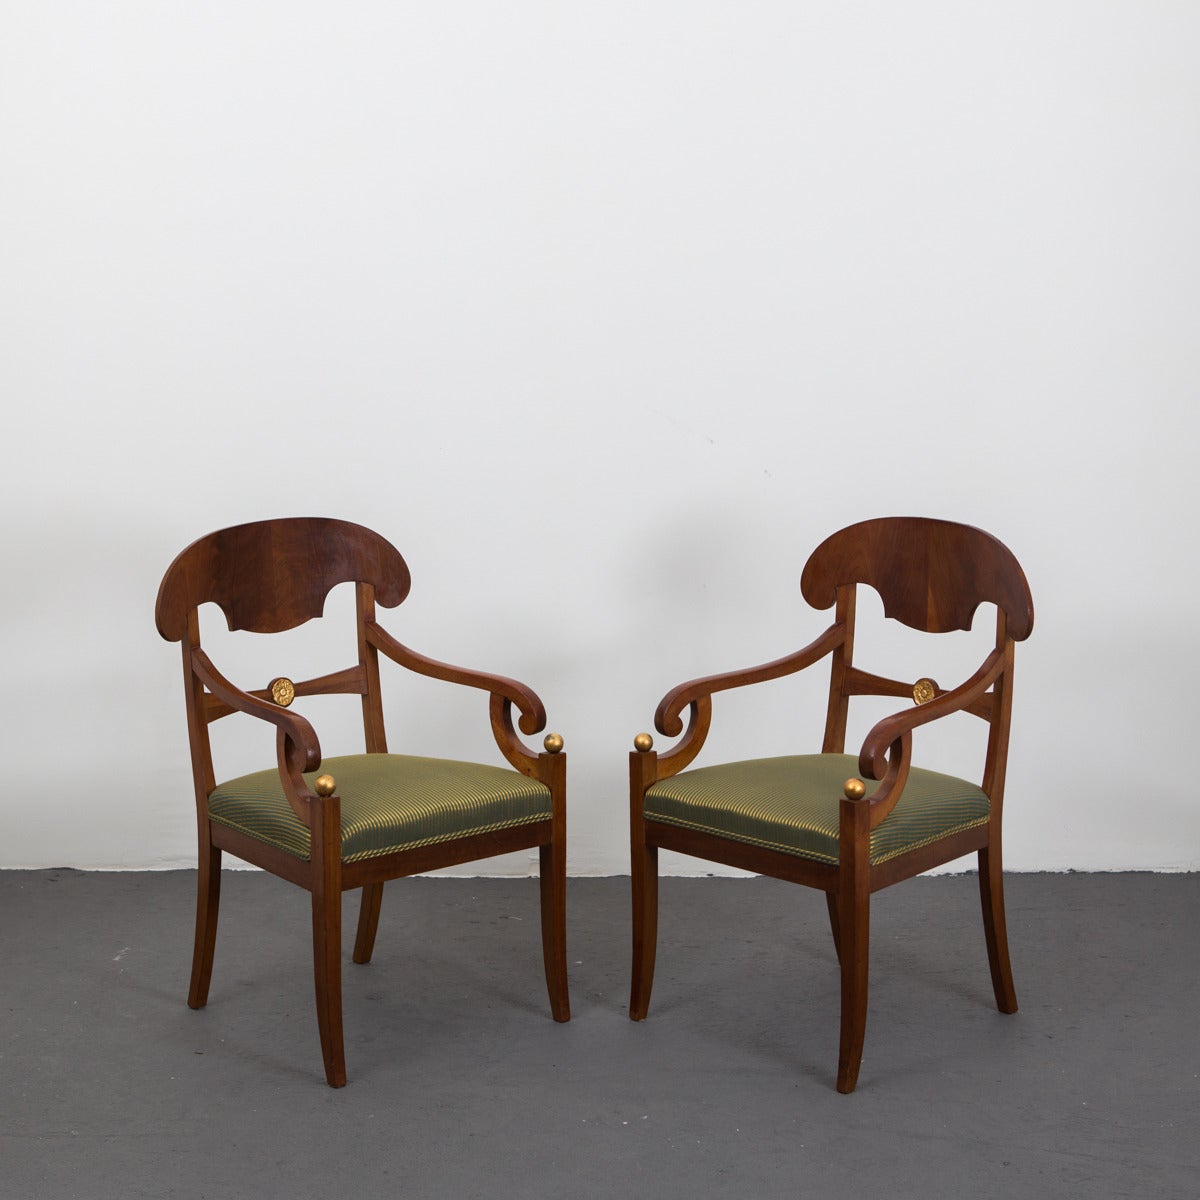 Armchairs Pair Swedish Empire period 19th century mahogany gilded details Sweden. A pair of Karl Johan/Biedermeier armchairs in mahogany and giltwood. Back splash shaped like a napoleon hat. Out curved back legs.